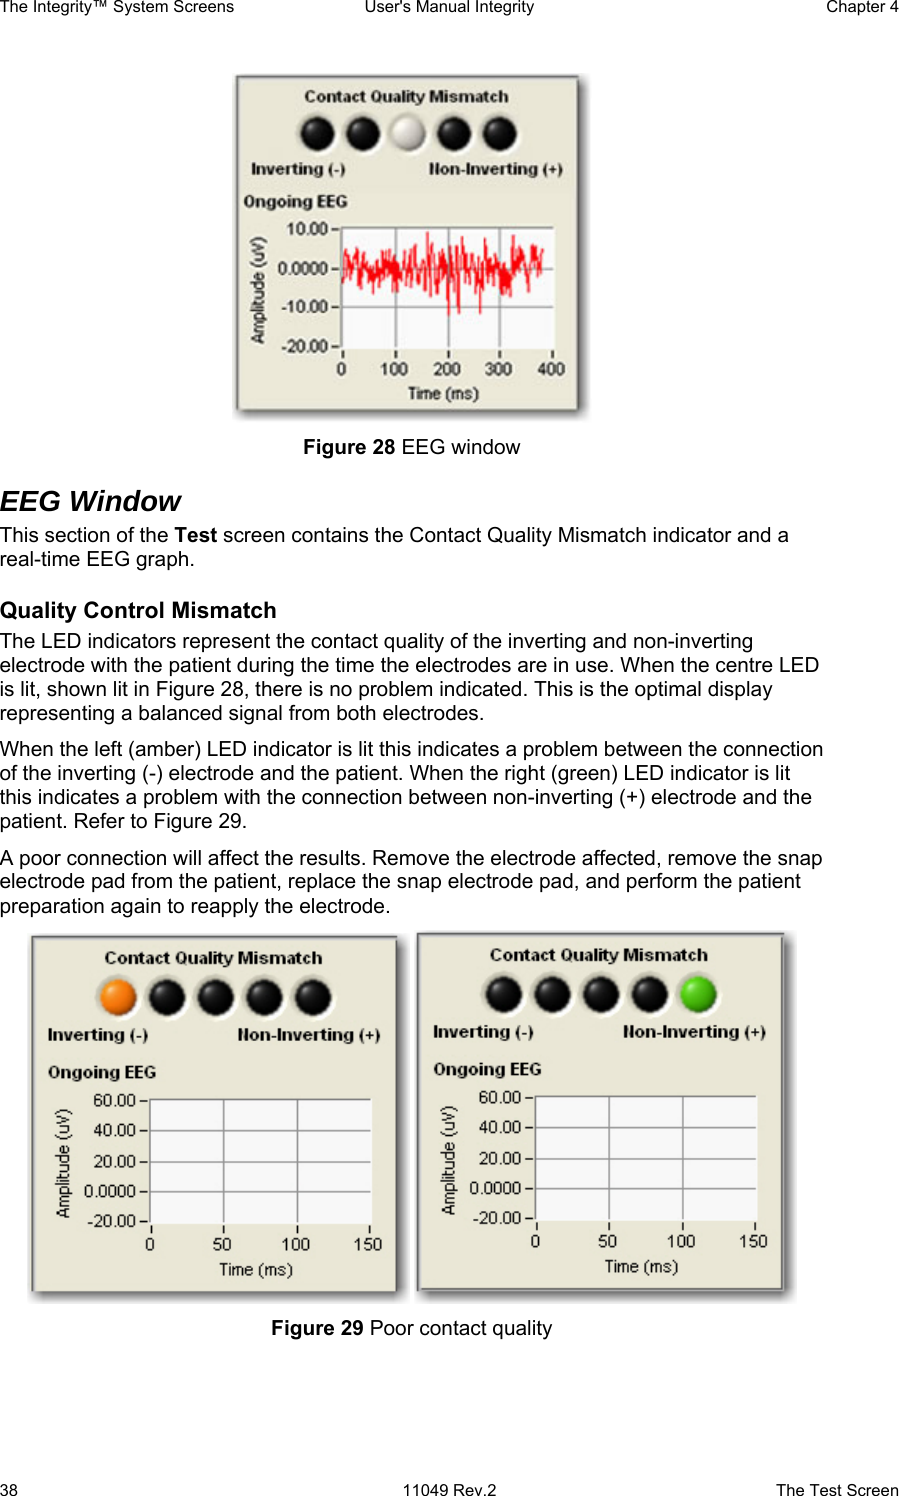 The Integrity™ System Screens  User&apos;s Manual Integrity  Chapter 4  38  11049 Rev.2  The Test Screen  Figure 28 EEG window EEG Window This section of the Test screen contains the Contact Quality Mismatch indicator and a real-time EEG graph. Quality Control Mismatch  The LED indicators represent the contact quality of the inverting and non-inverting electrode with the patient during the time the electrodes are in use. When the centre LED is lit, shown lit in Figure 28, there is no problem indicated. This is the optimal display representing a balanced signal from both electrodes.  When the left (amber) LED indicator is lit this indicates a problem between the connection of the inverting (-) electrode and the patient. When the right (green) LED indicator is lit this indicates a problem with the connection between non-inverting (+) electrode and the patient. Refer to Figure 29. A poor connection will affect the results. Remove the electrode affected, remove the snap electrode pad from the patient, replace the snap electrode pad, and perform the patient preparation again to reapply the electrode.    Figure 29 Poor contact quality 